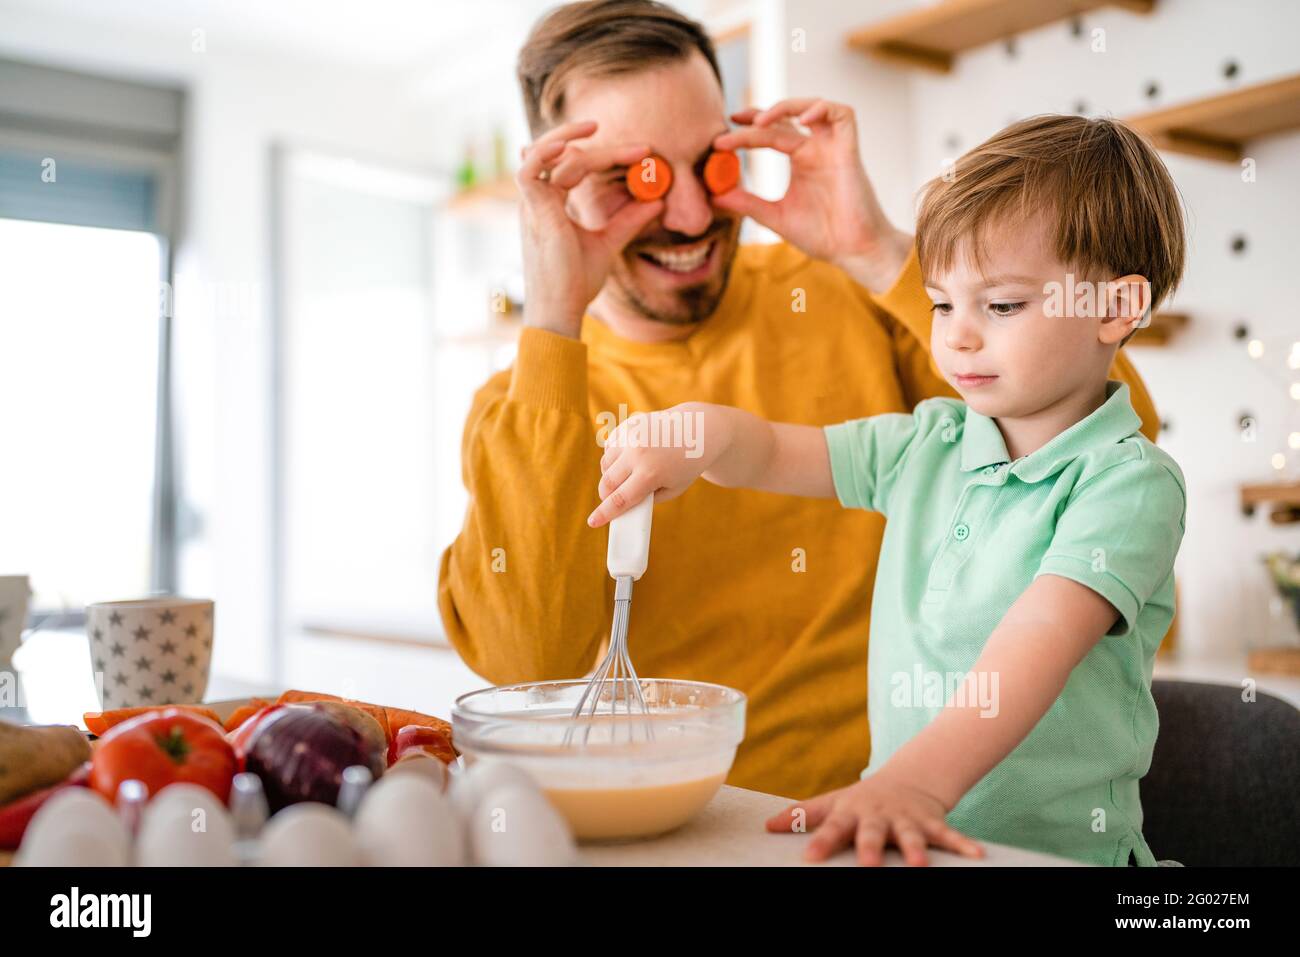 Smiling father with kids preparing healthy food and spending time together Stock Photo